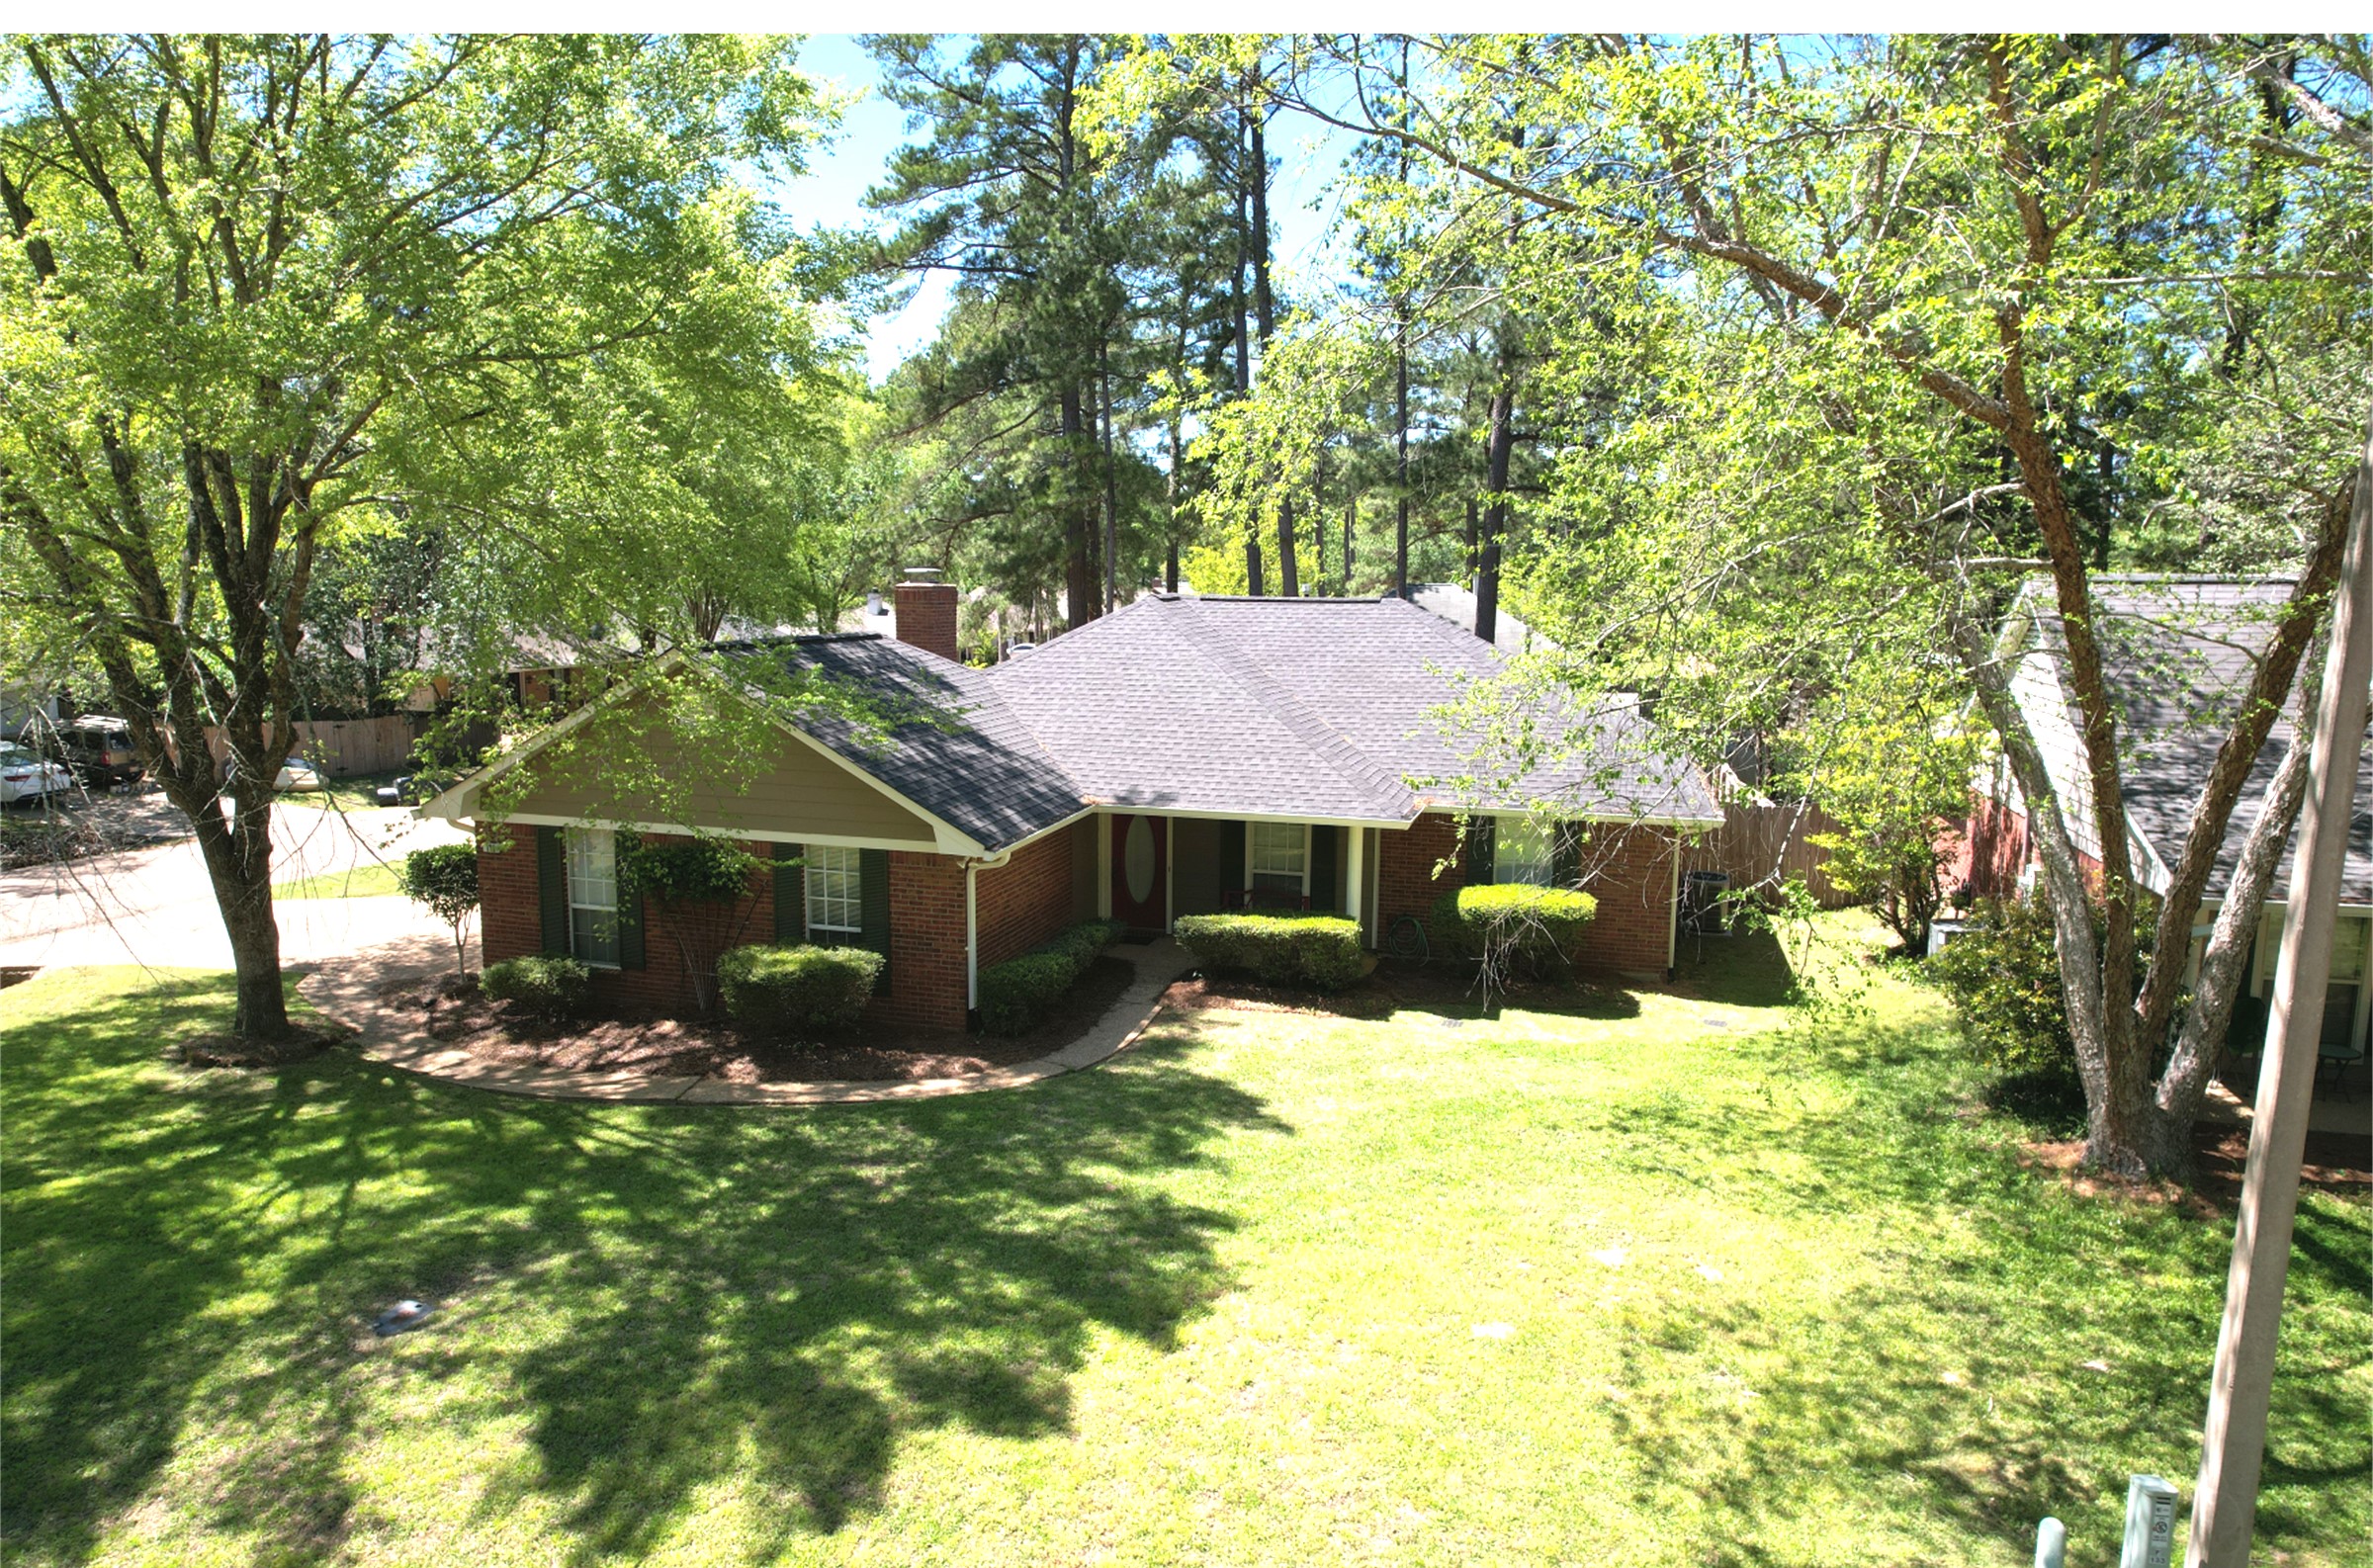 Home in Madison County at 133 Habor Road in Madison, MS 